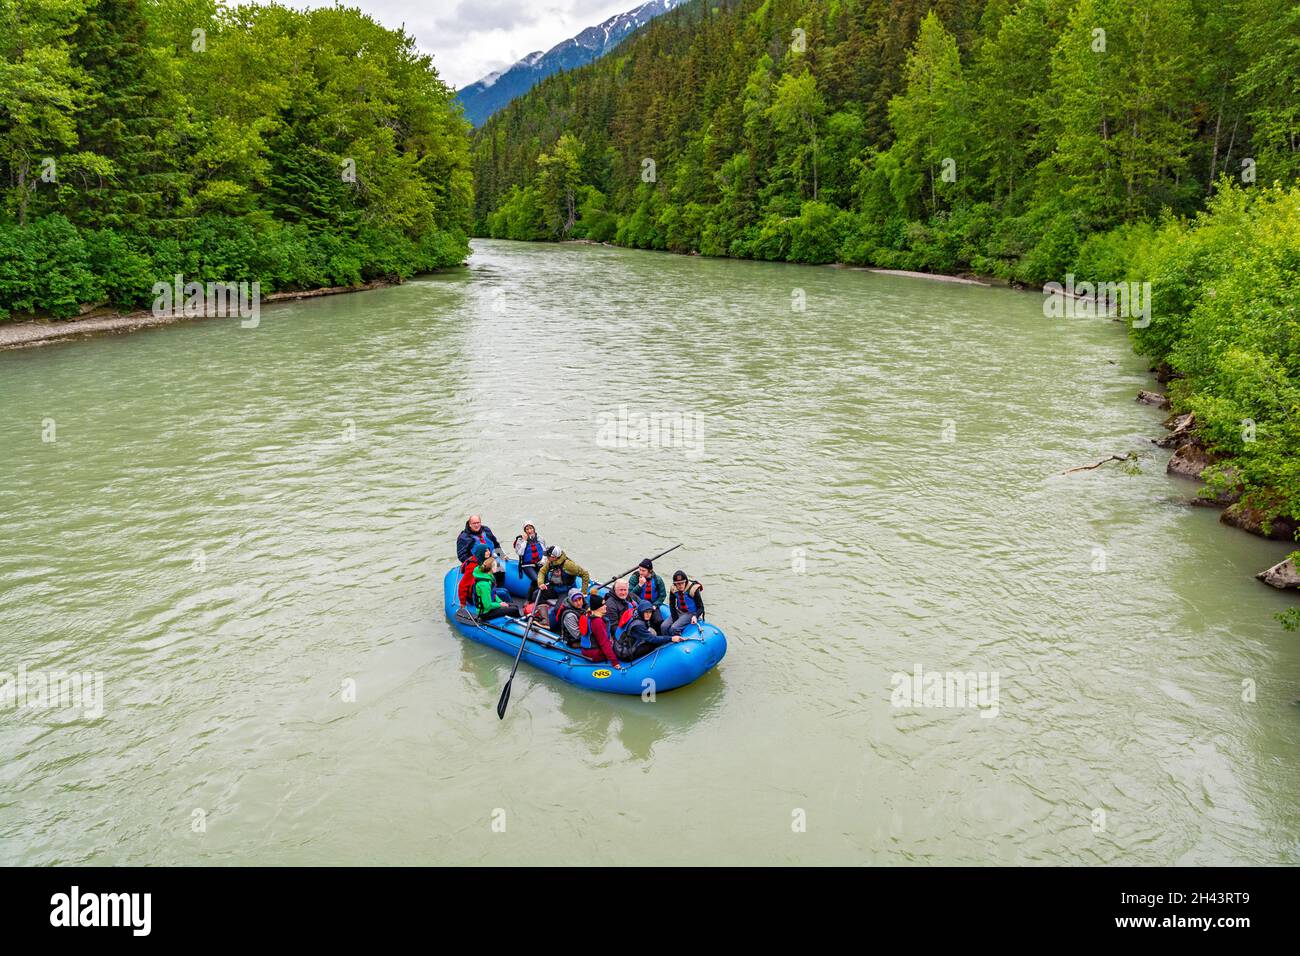 Alaska, Dyea, Klondike Gold Rush National Historical Park, Chilkoot Rail Unit, Taiya River, participants in hike and float excursion Stock Photo